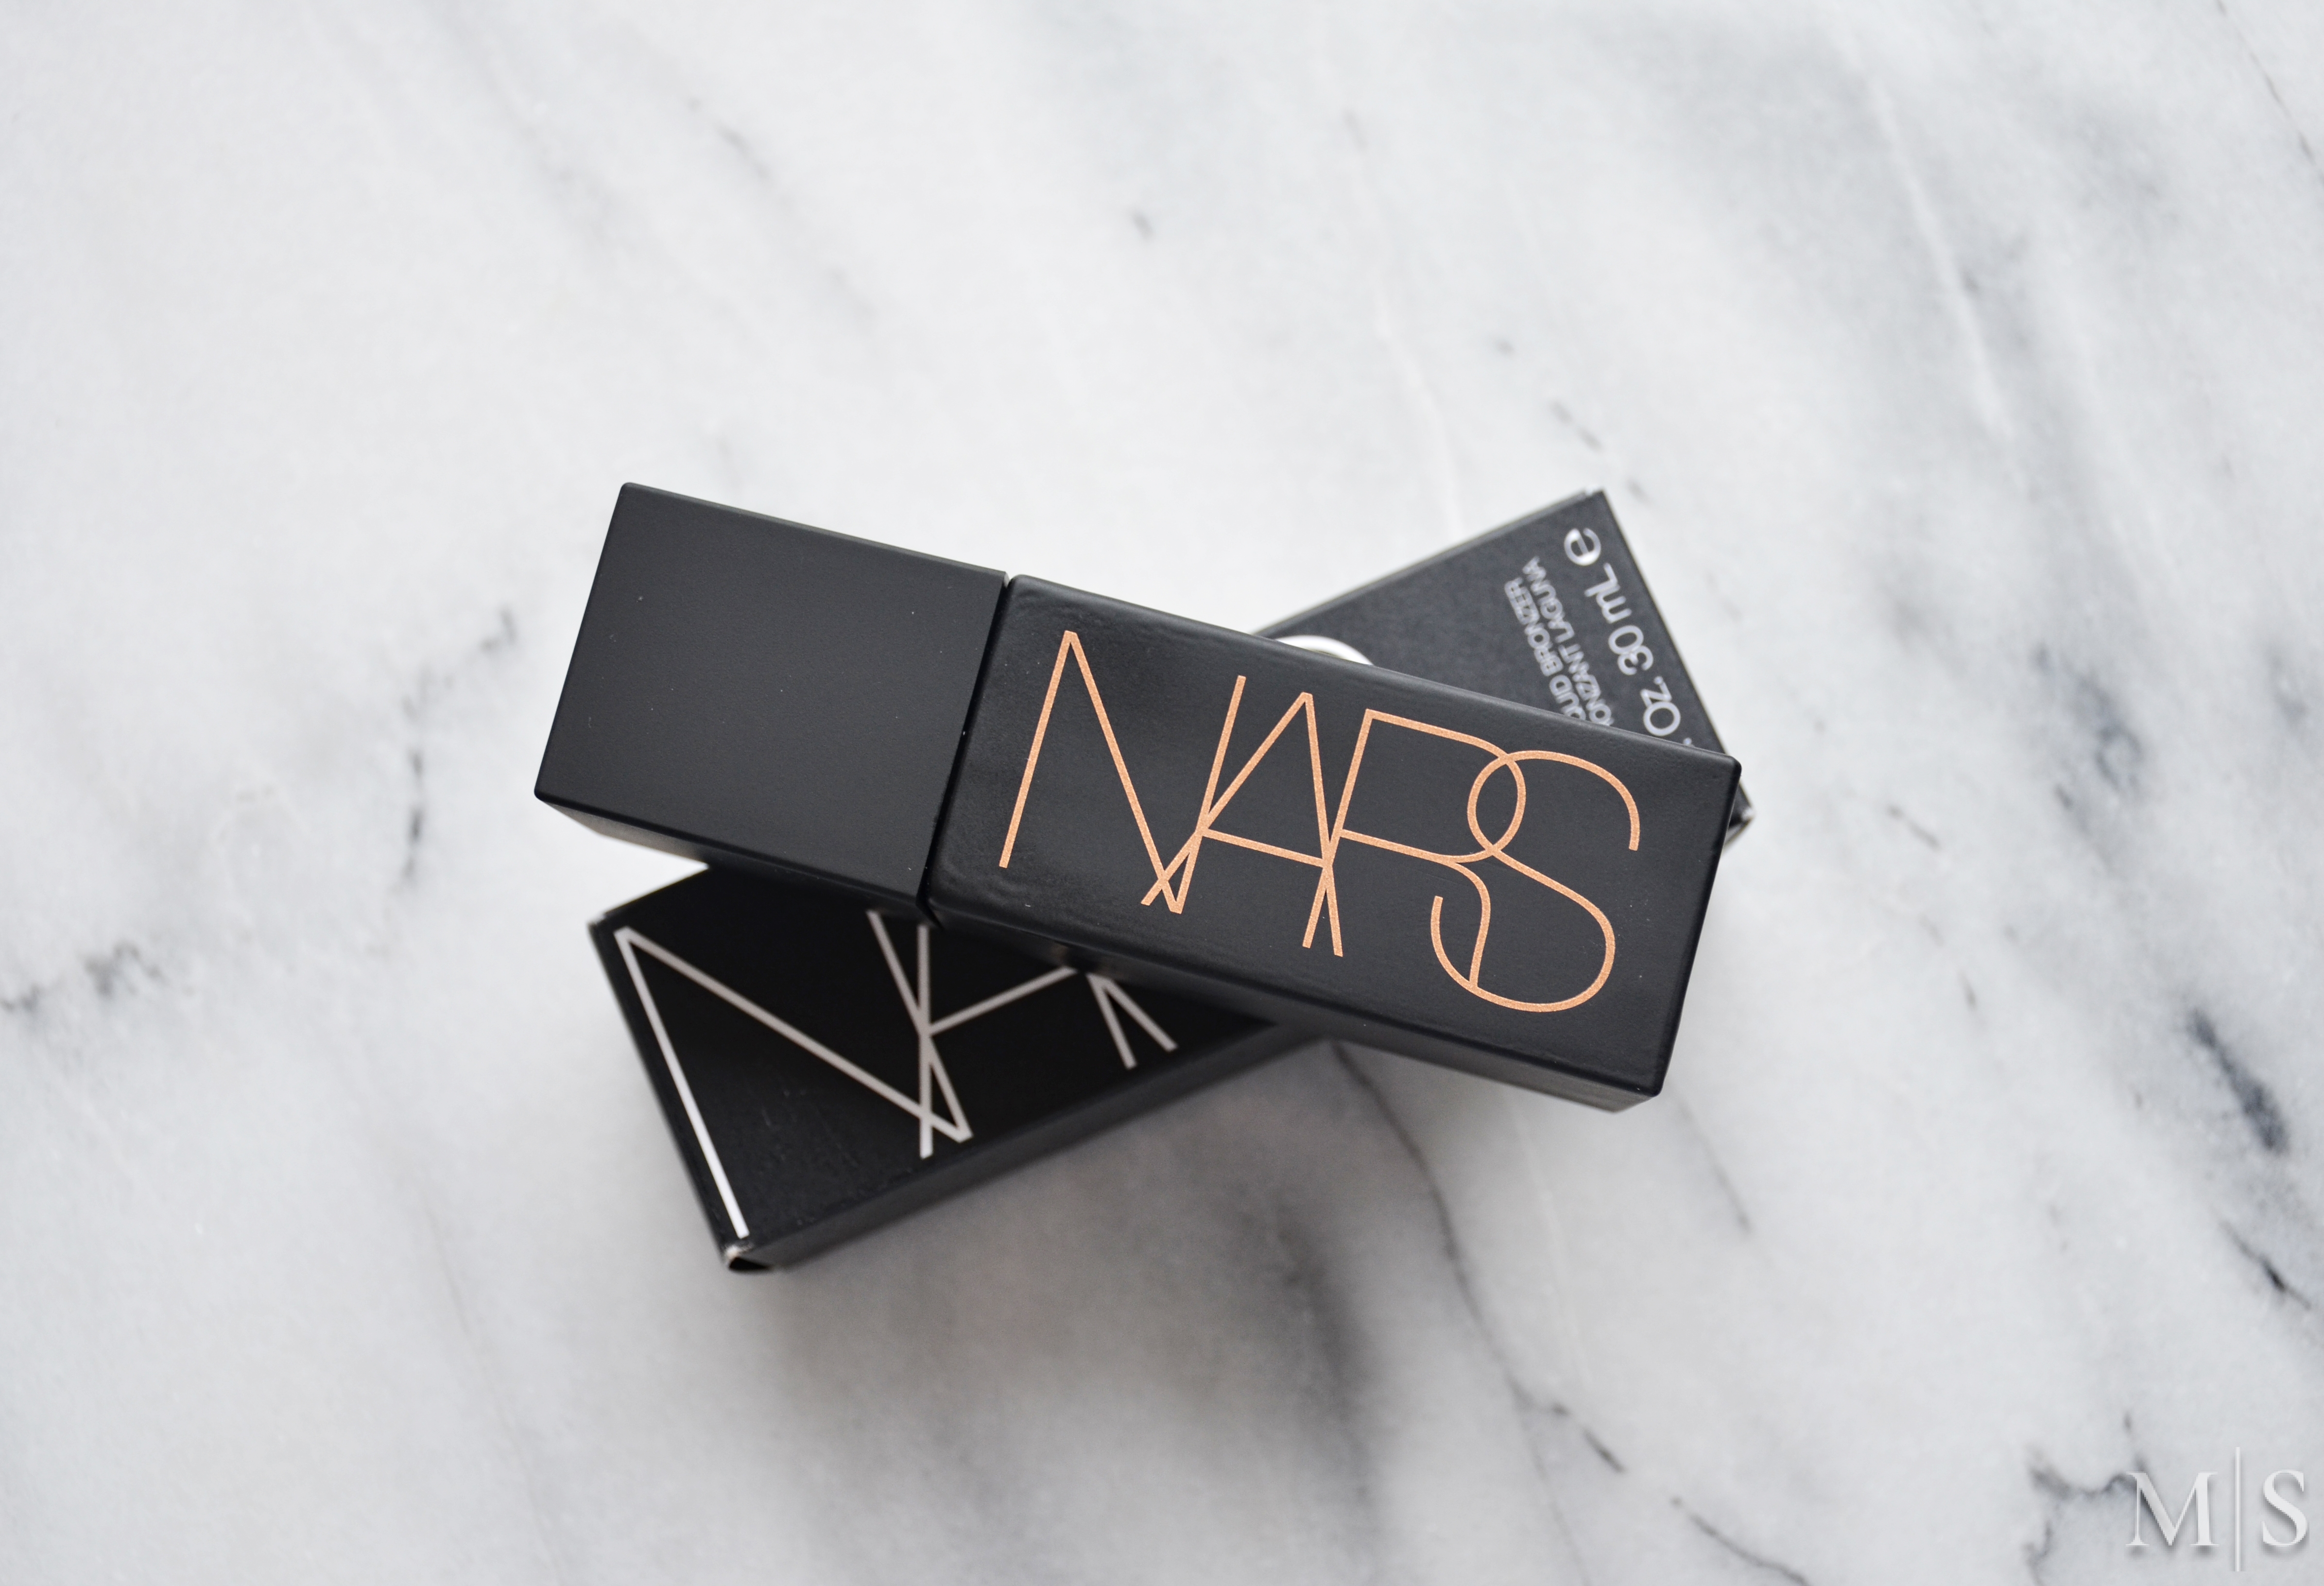 Decimal guide Dyrke motion NARS Laguna Liquid Bronzer Review & Swatches - Makeup-Sessions